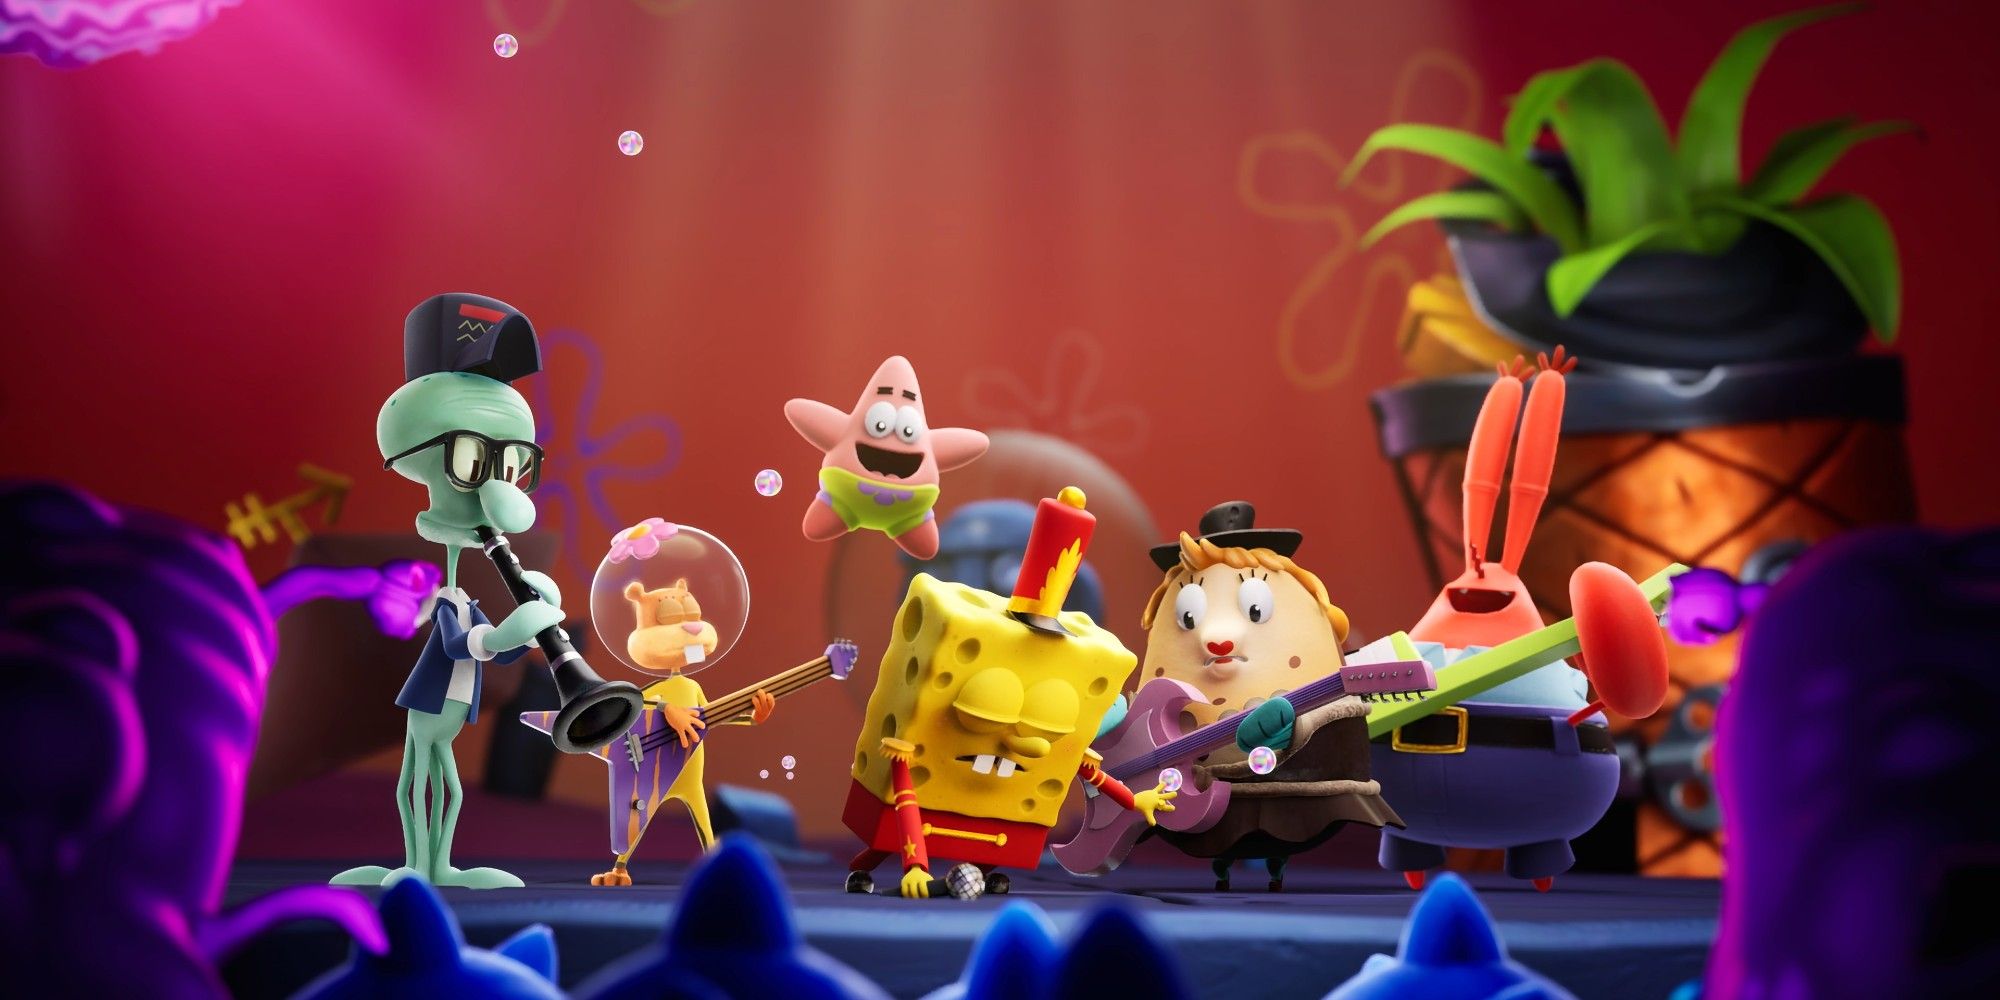 Spongebob Cosmic Shake screencap showing Sqidward, Sandy, Spongebob, Mrs. Puff, and Mr. Krabs performing in a bad with ballon Patrick in the background.